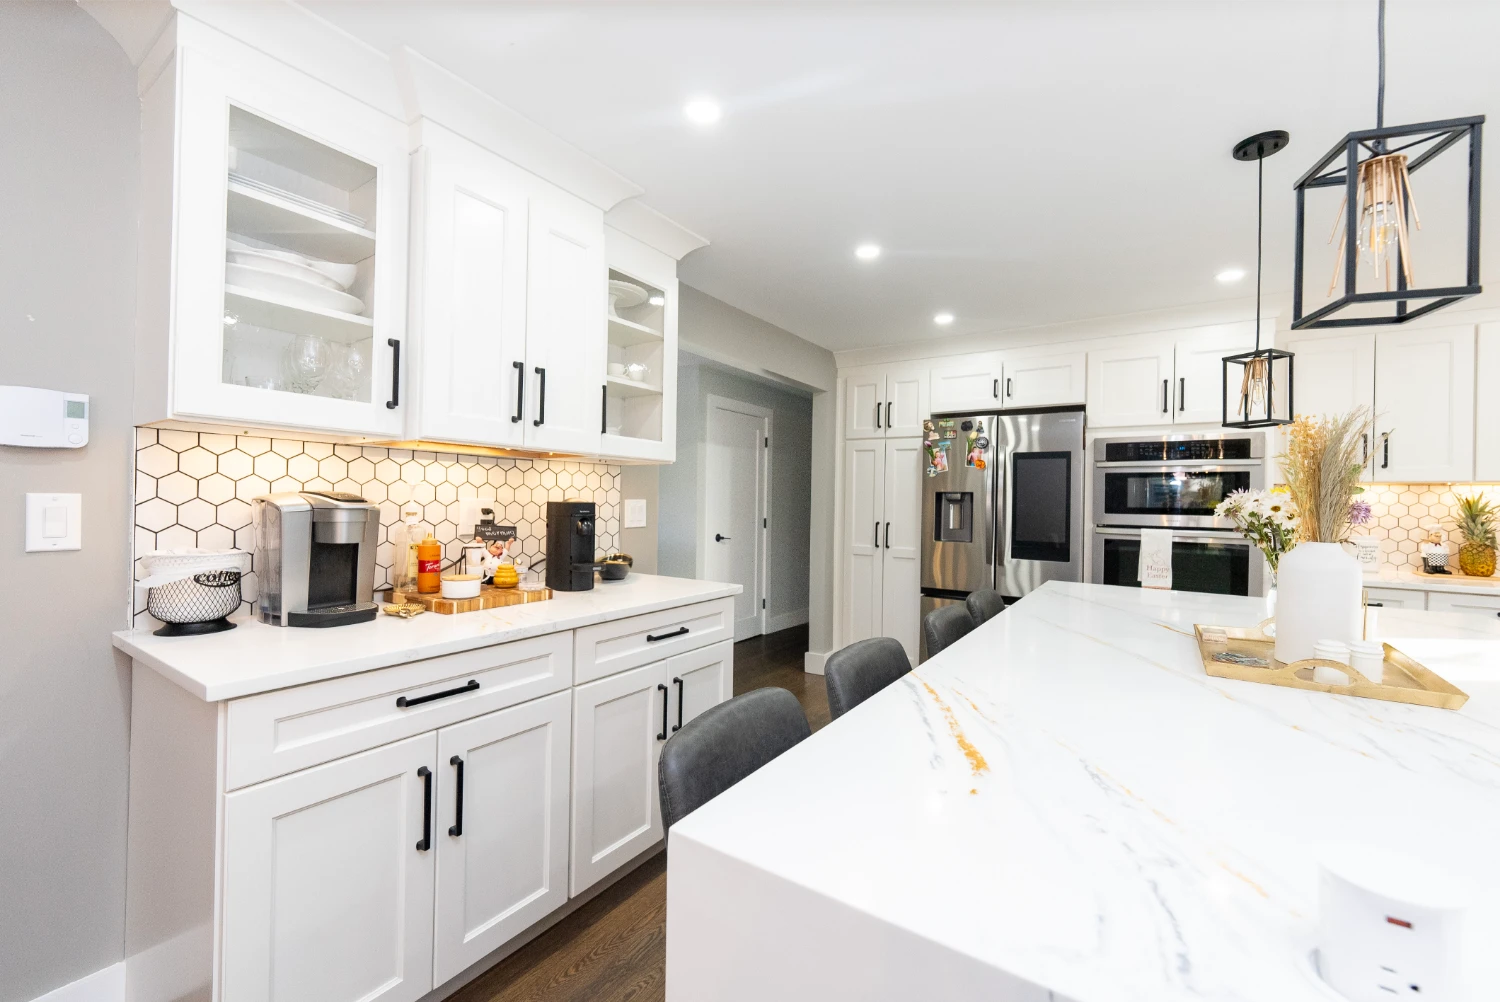 Bright kitchen renovation featuring a large island, wooden floors, and black accents.